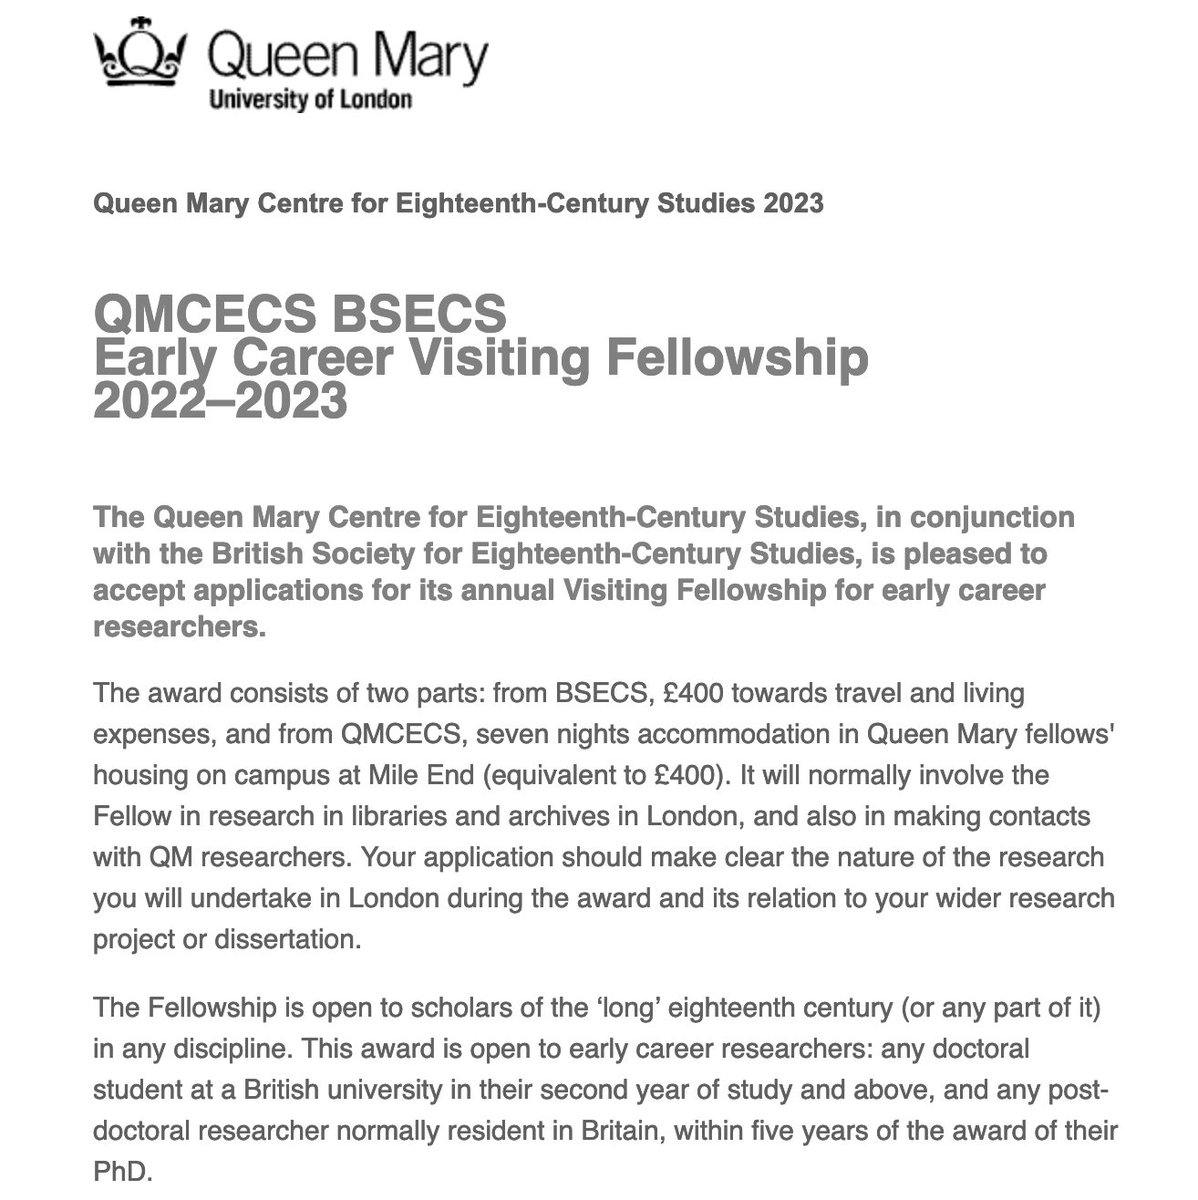 QMCECS and BSECS Early Career Visiting Fellowship: applications accepted to support a week's research on eighteenth-century studies in libraries and archives in London. Deadline 8 March. More info and application form: tinyurl.com/mr3trbjf